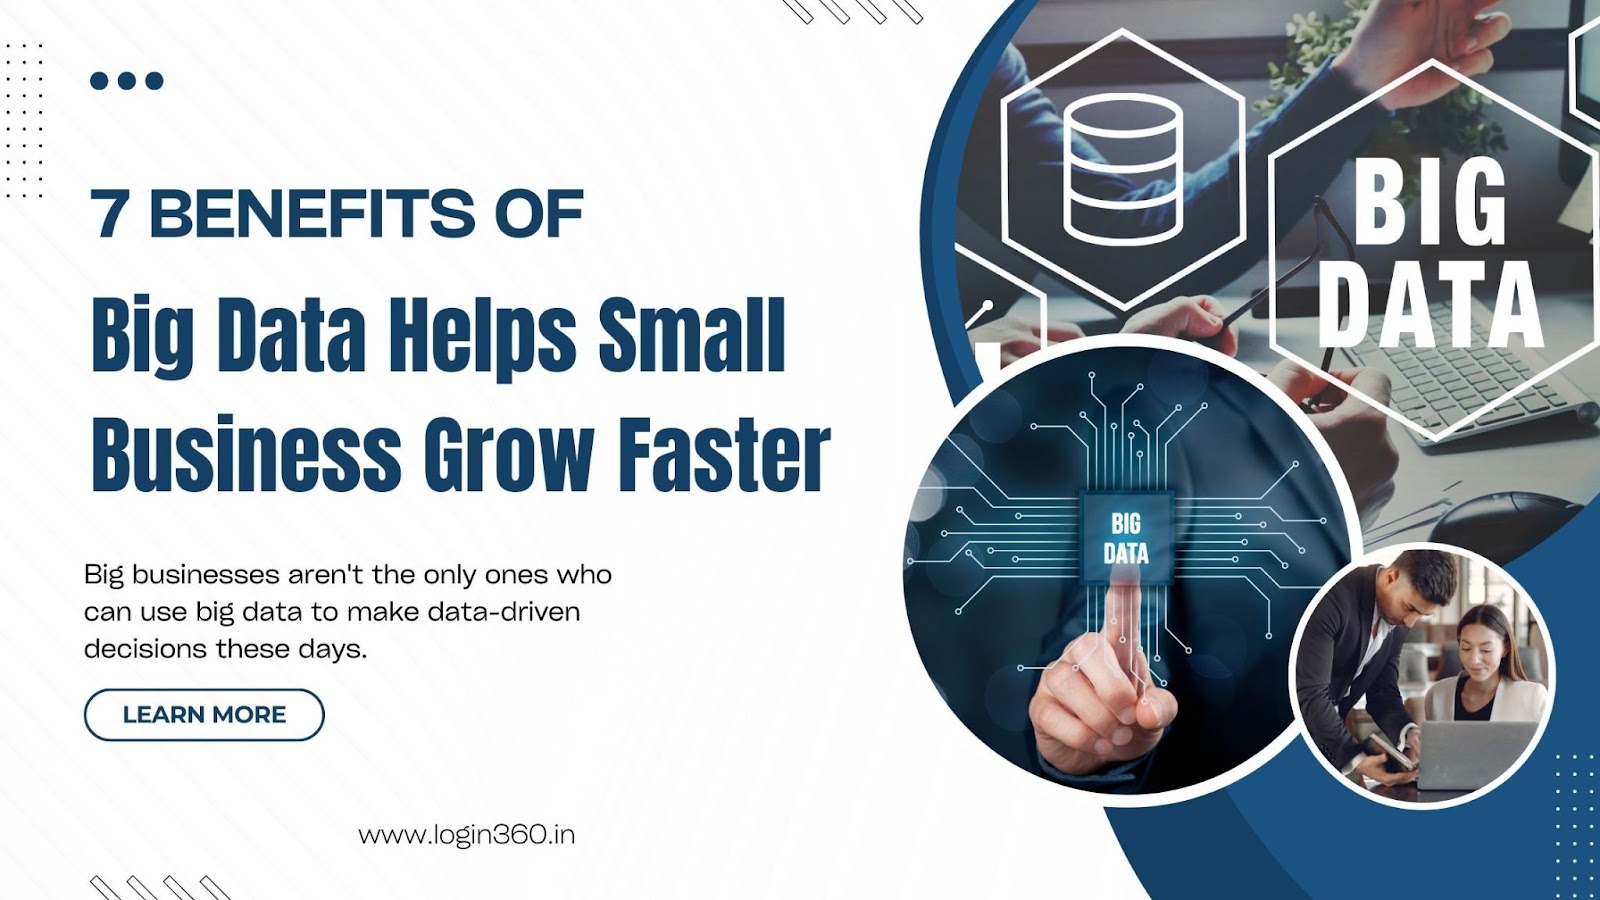 7 Benefits of Big Data Helps Small Business Grow Faster 1